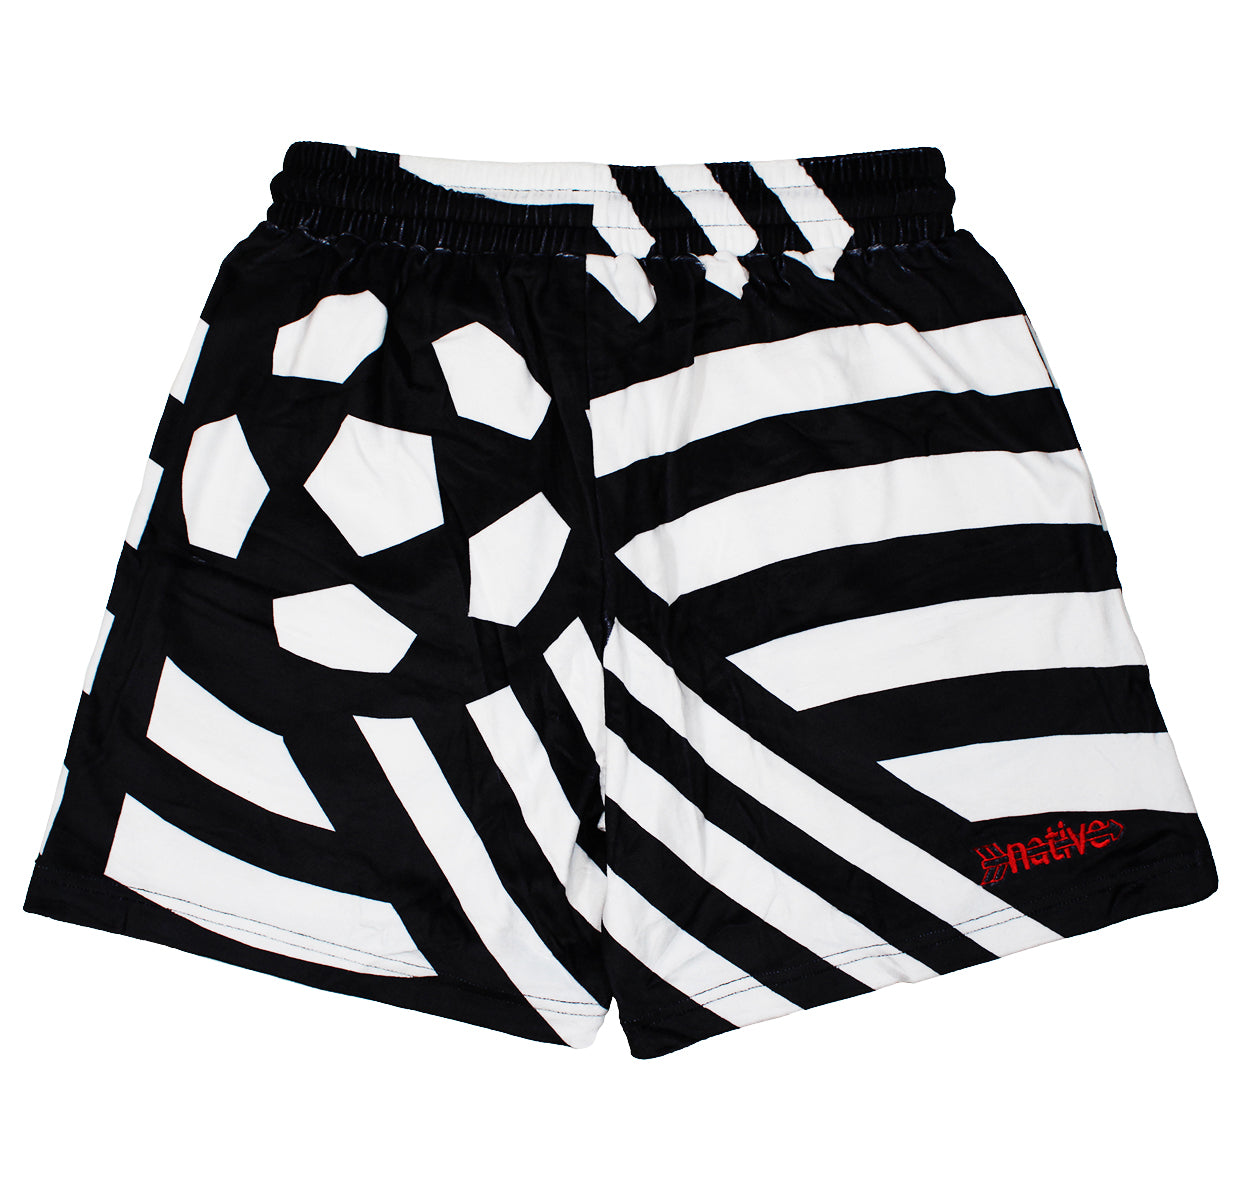 world cup 94 velour shorts in black/white